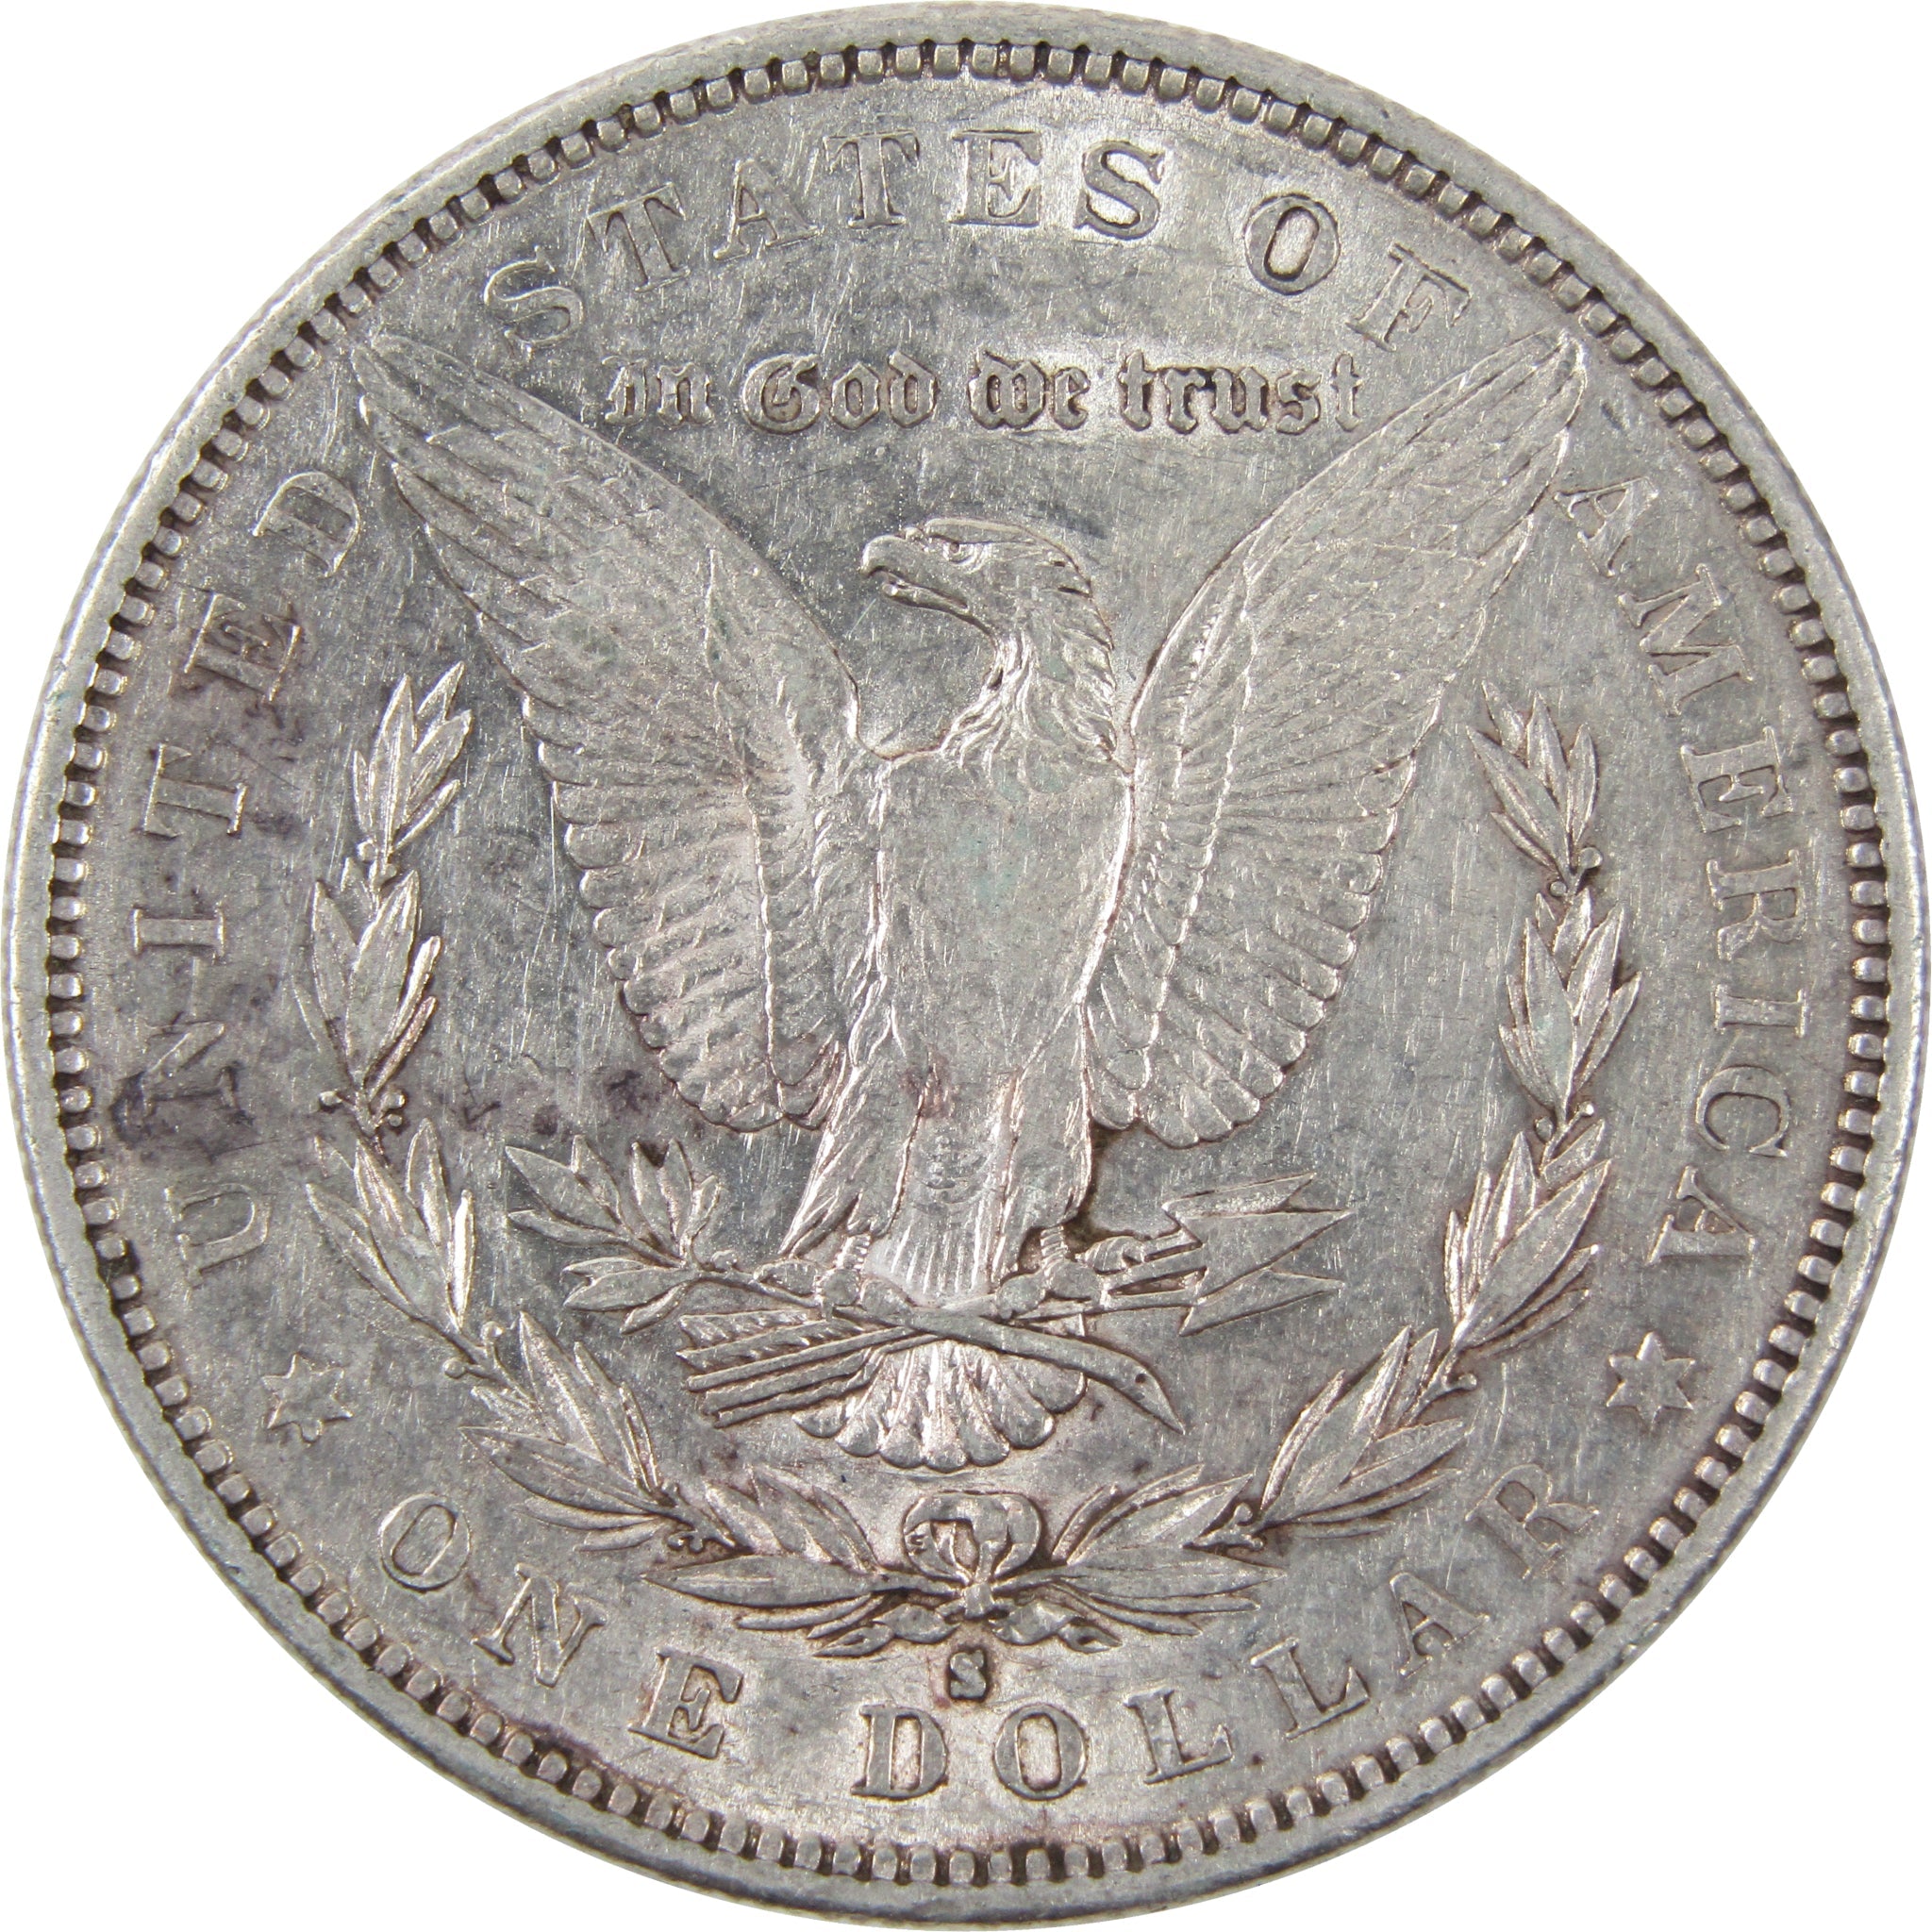 1883 S Morgan Dollar XF EF Extremely Fine 90% Silver Coin SKU:I2465 - Morgan coin - Morgan silver dollar - Morgan silver dollar for sale - Profile Coins &amp; Collectibles